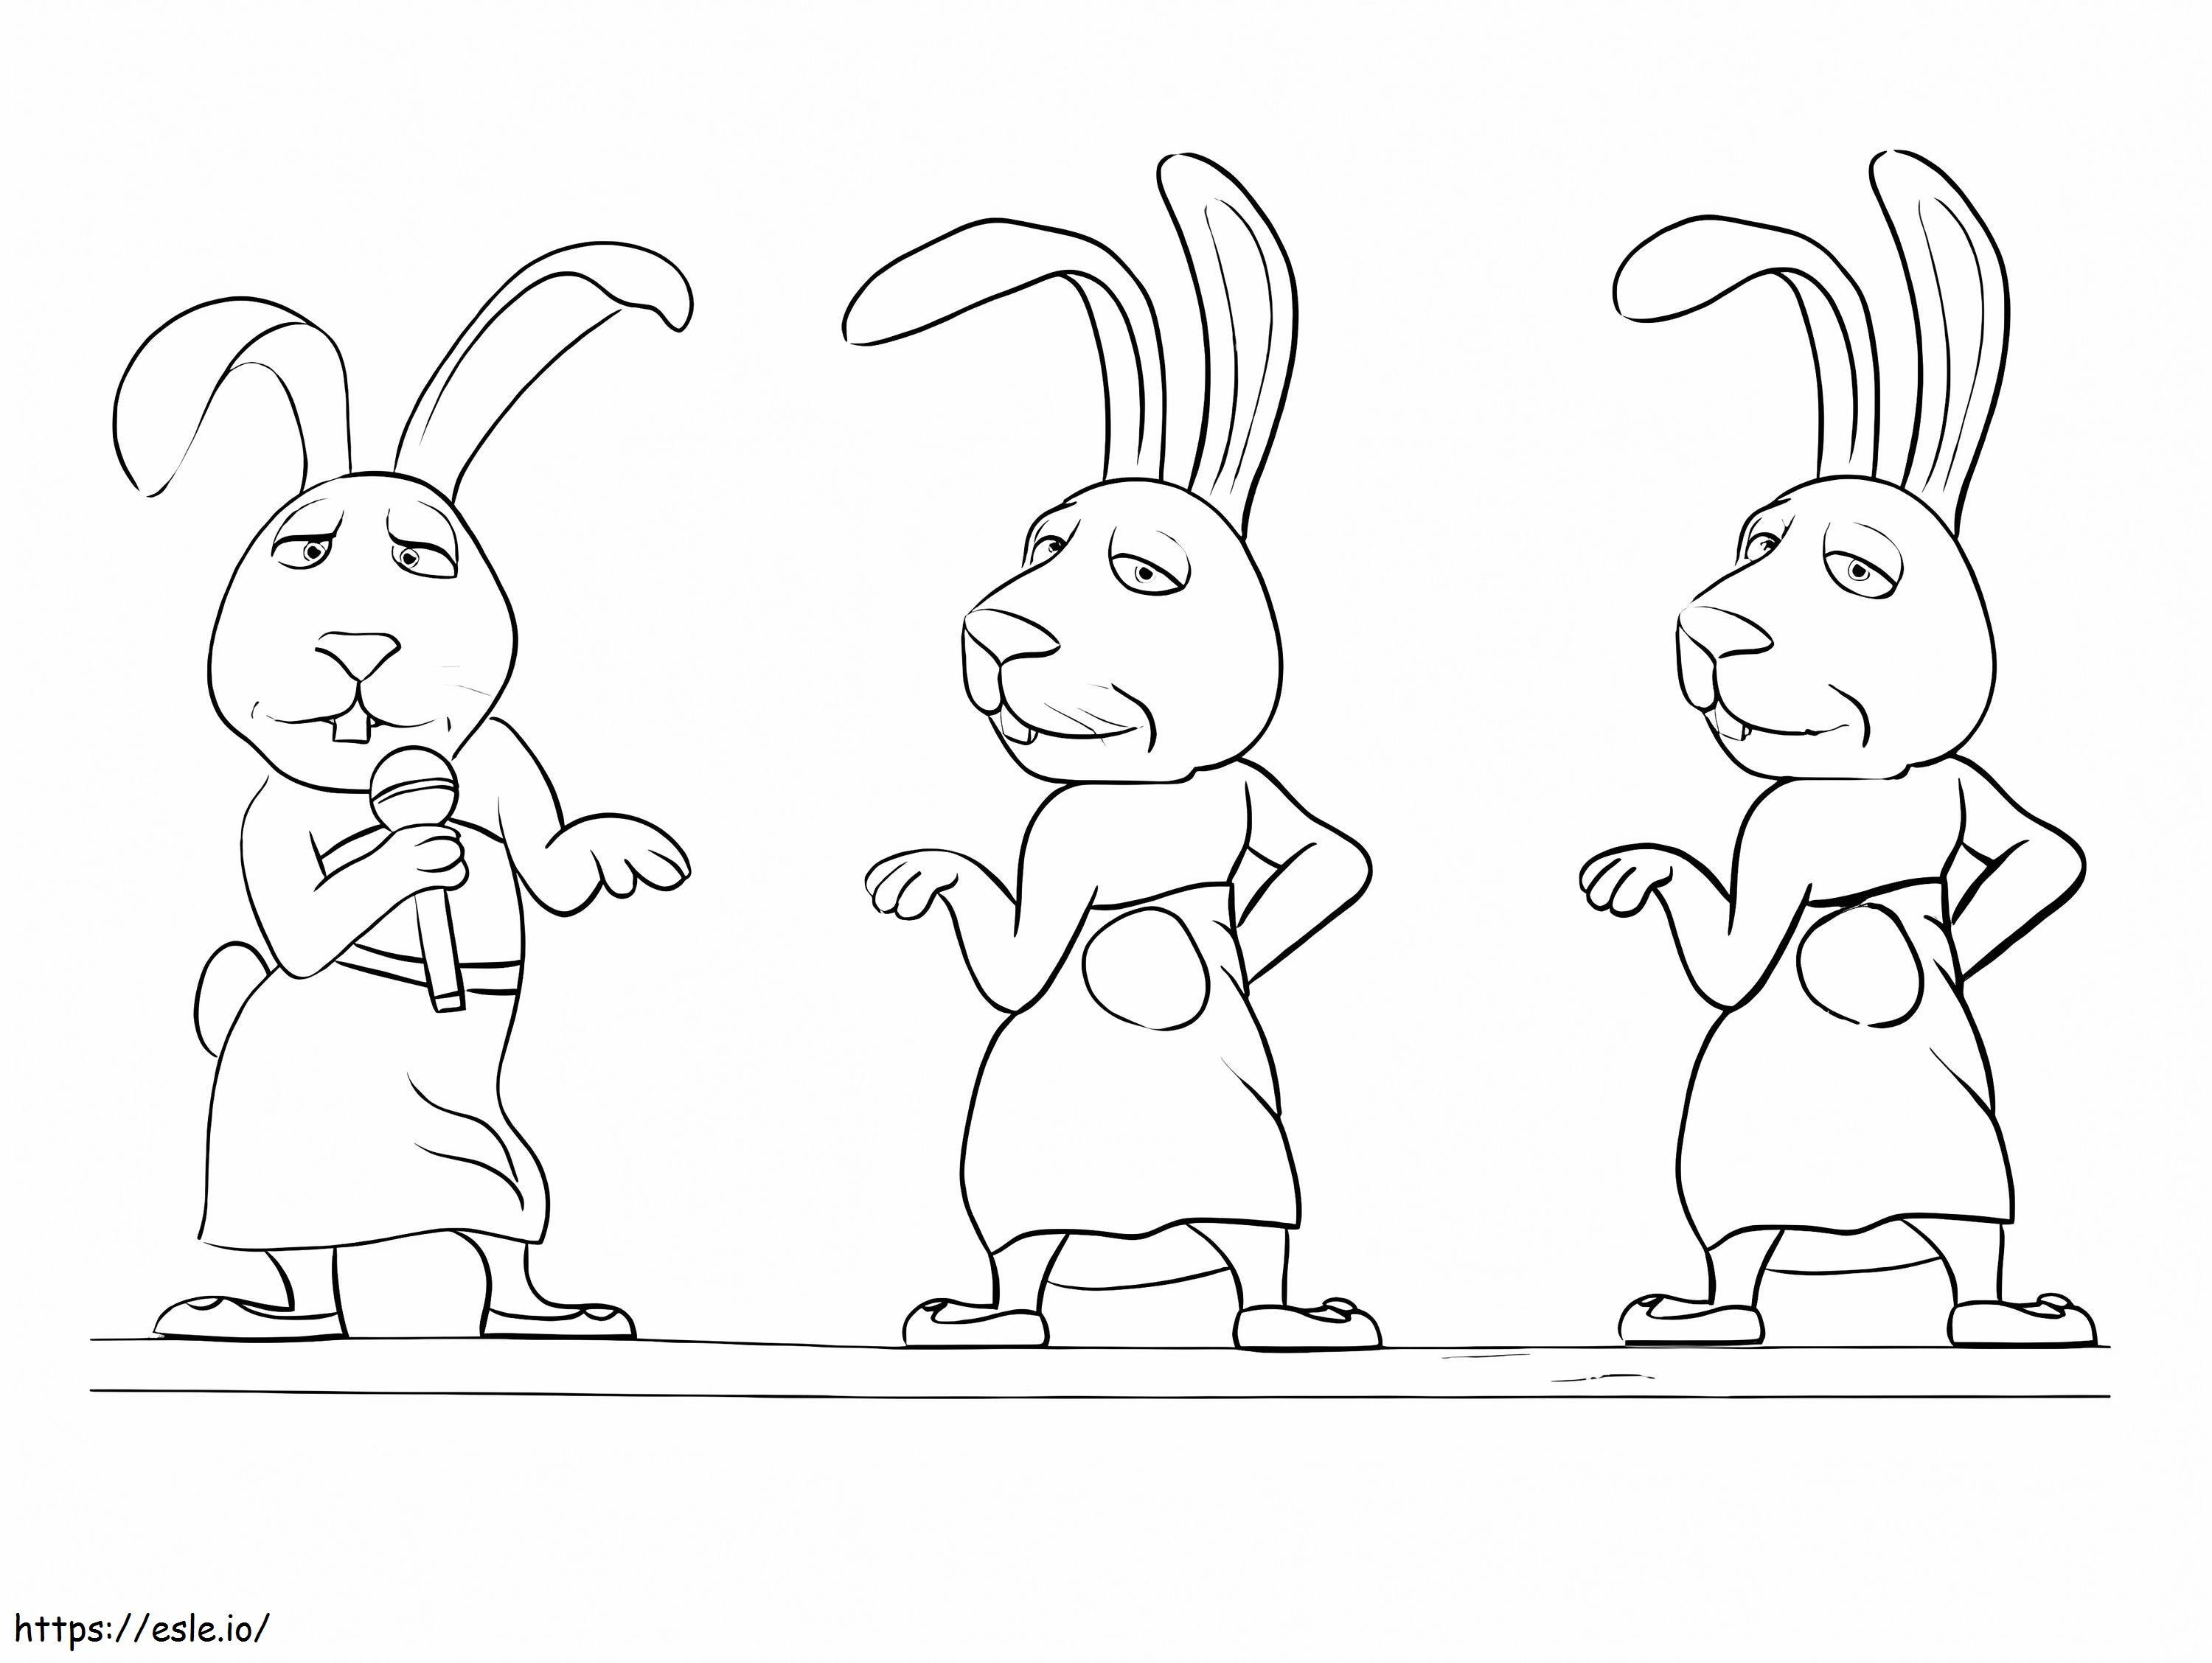 Bunnies From Sing Movie coloring page